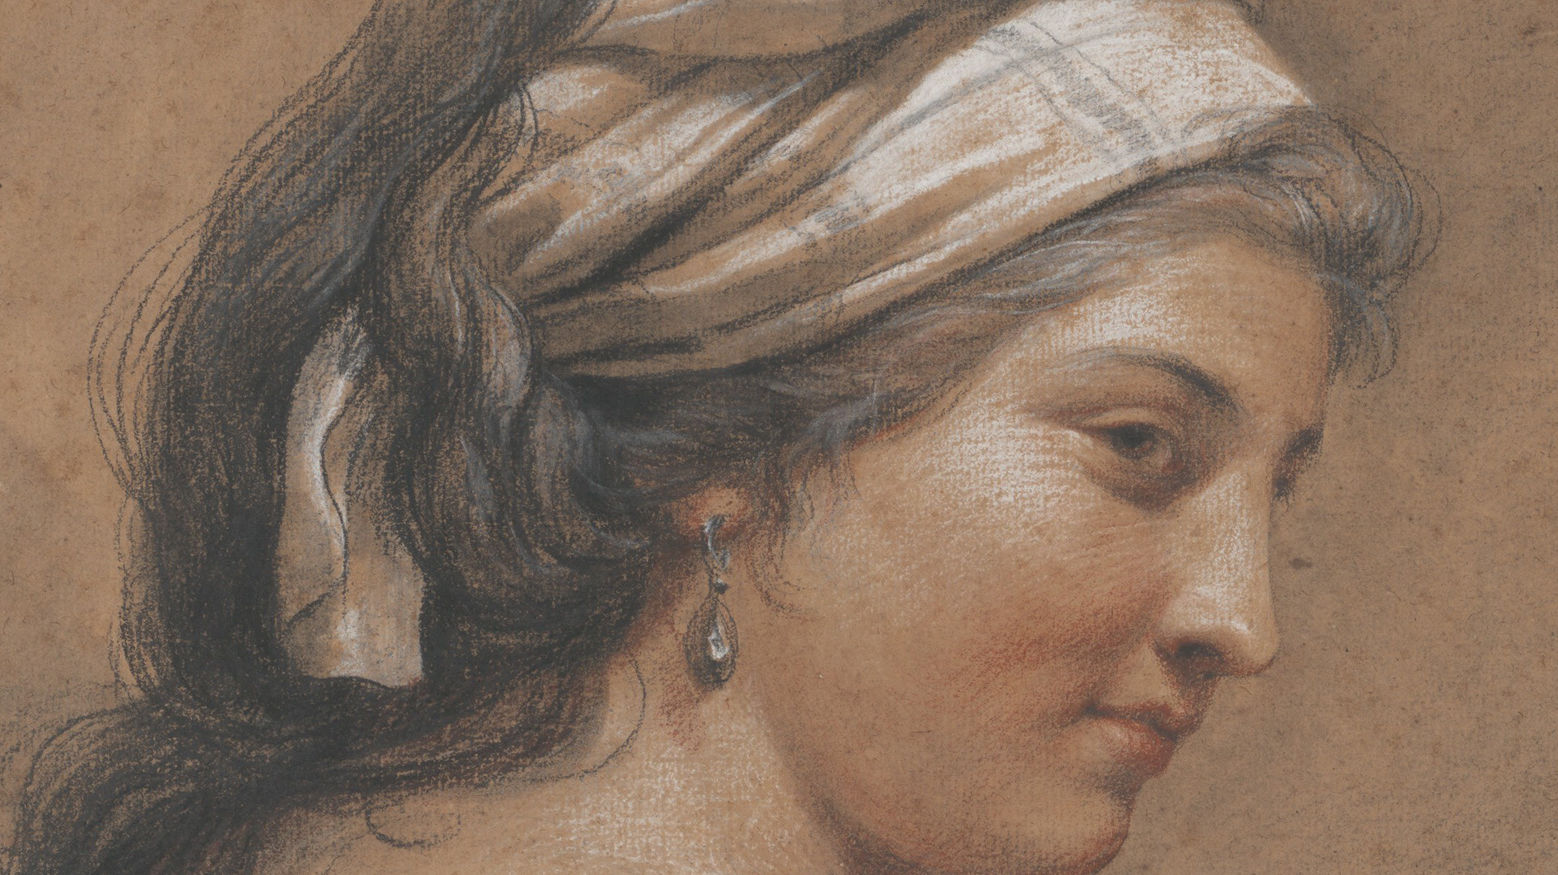 A detail profile of a woman's face rendered in white, black, and red chalk.